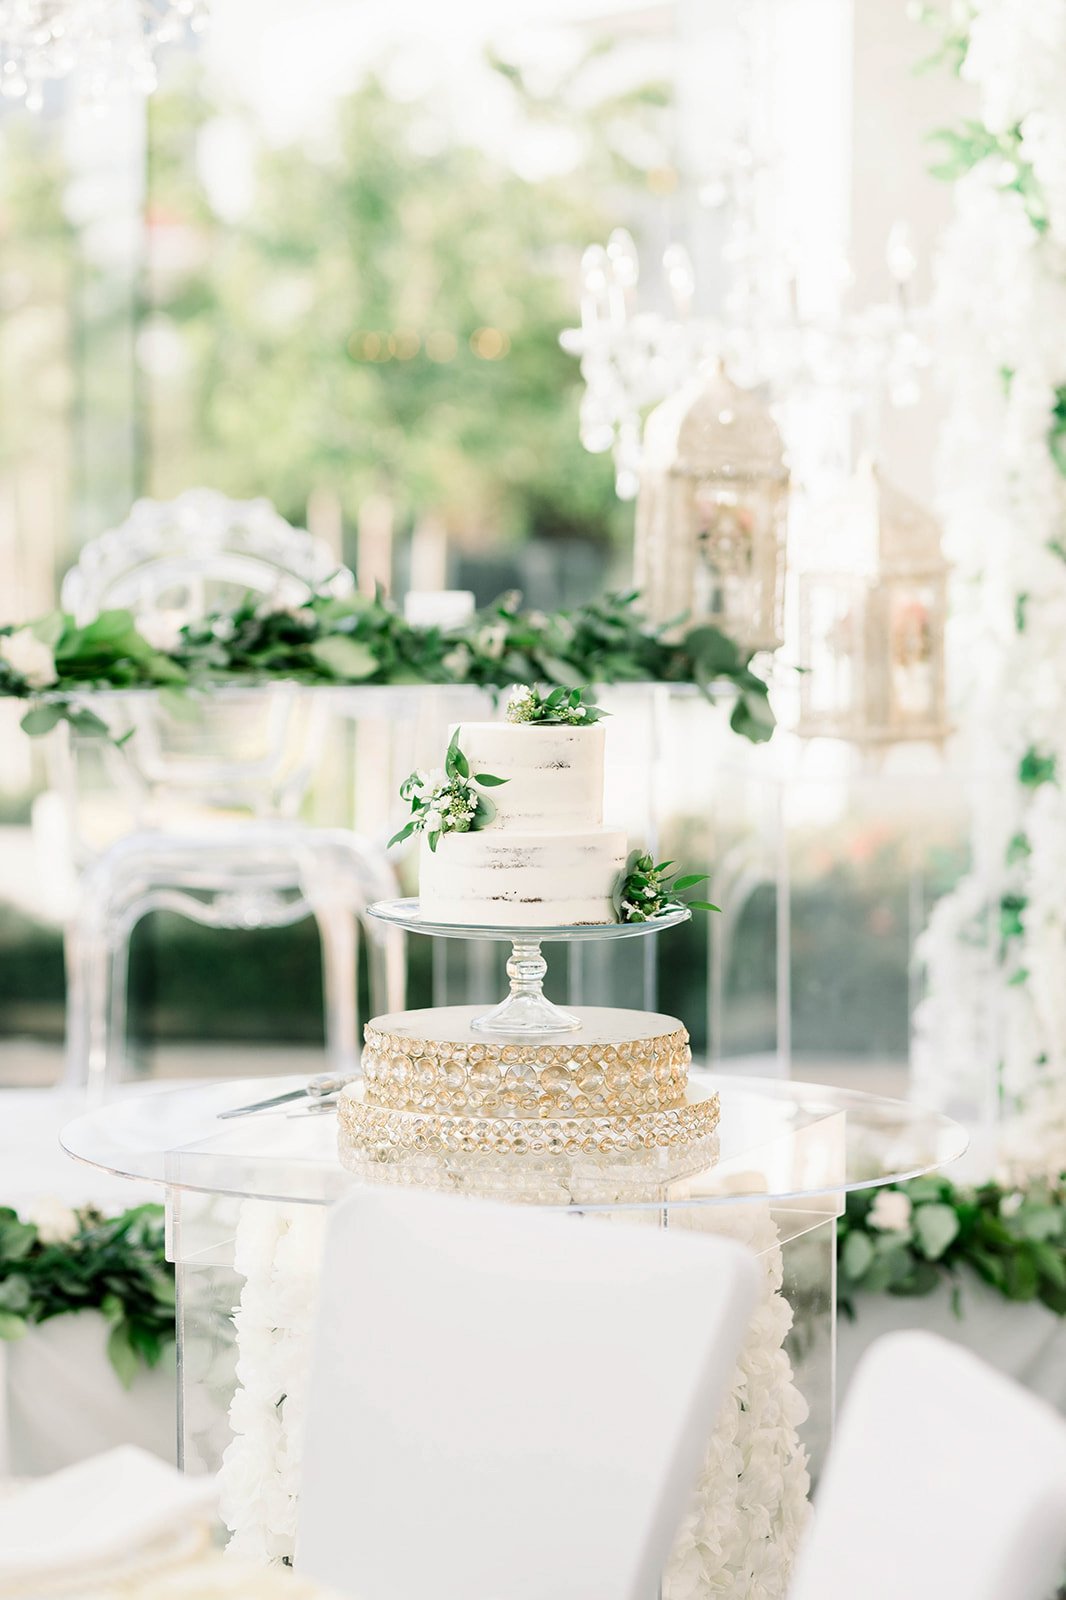 A white wedding cake is decorated with green leaves in a reception space.